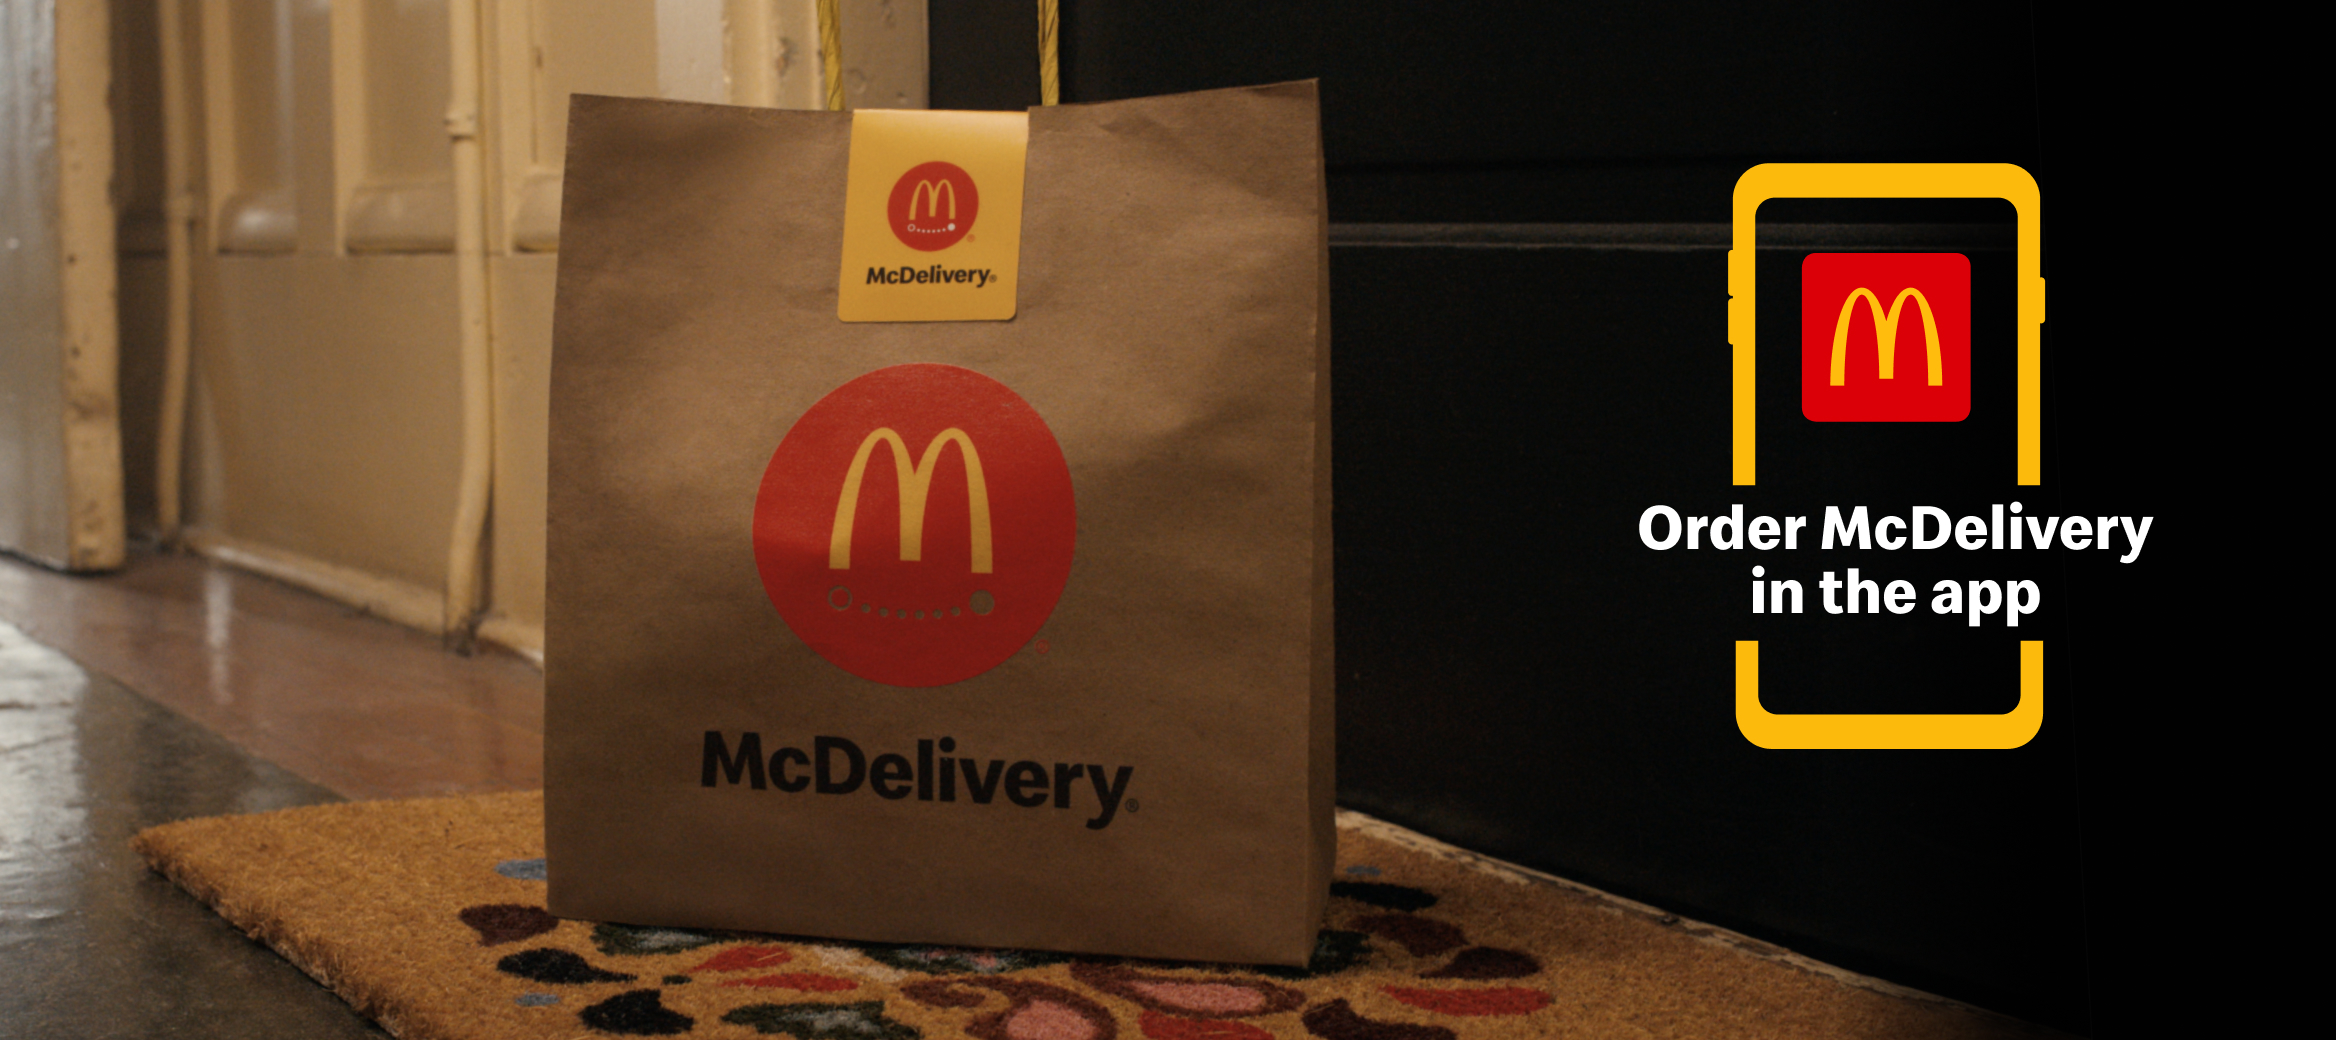 for McDelivery® brought to your doorstep, order McDelivery in the app